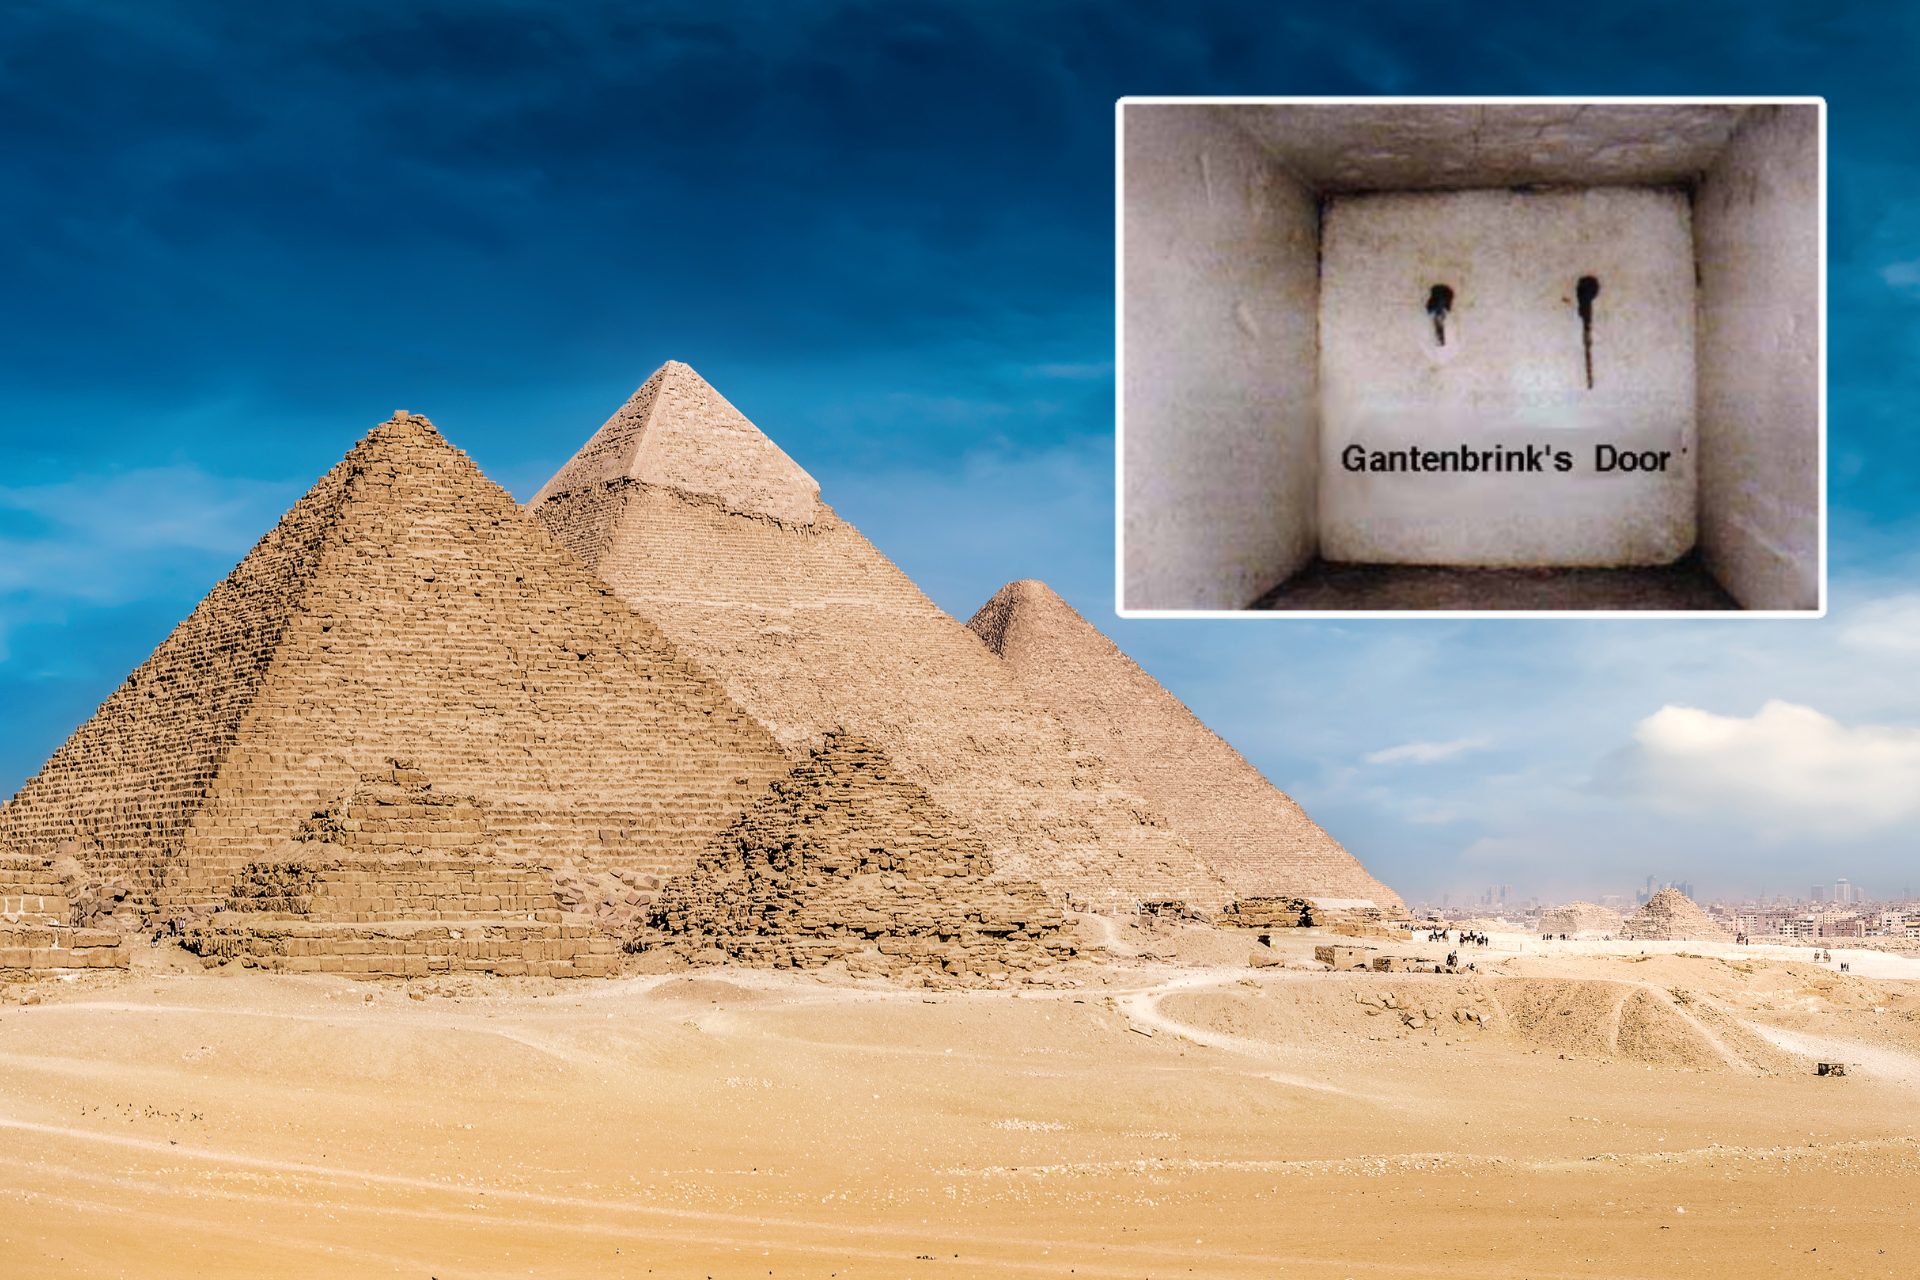 A collage featuring a photograph of the pyramids at Giza and a passage with a door found in one of them.